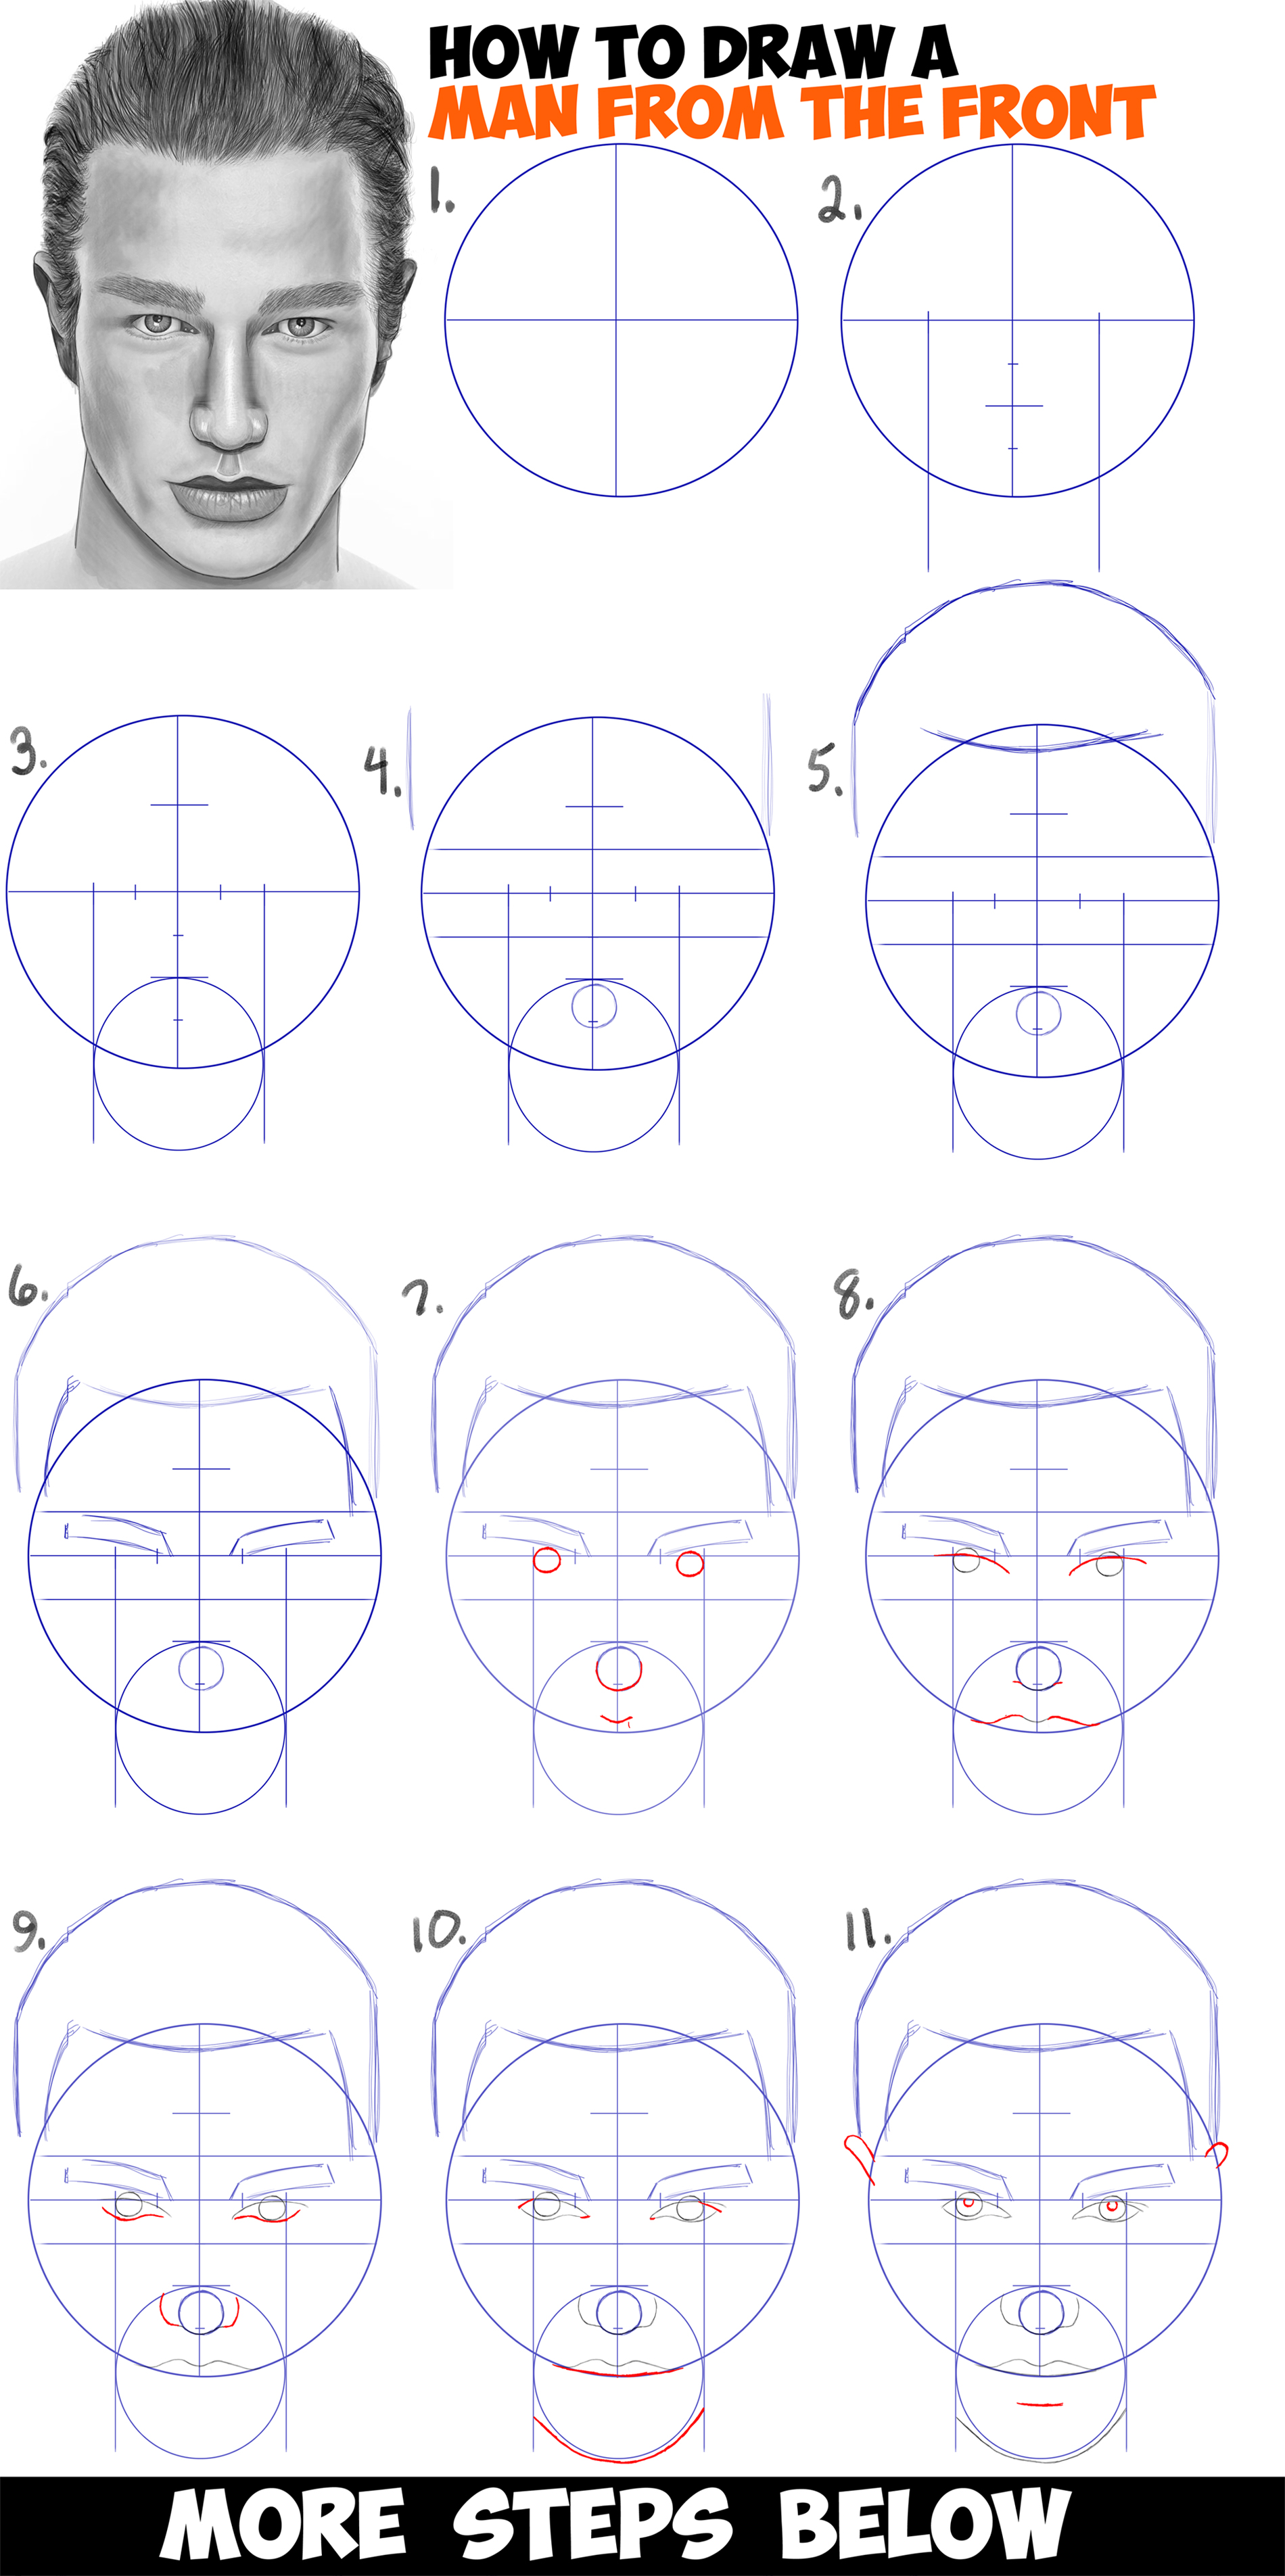 How To Draw An Easy Face, Step by Step, Drawing Guide, by Dawn - DragoArt